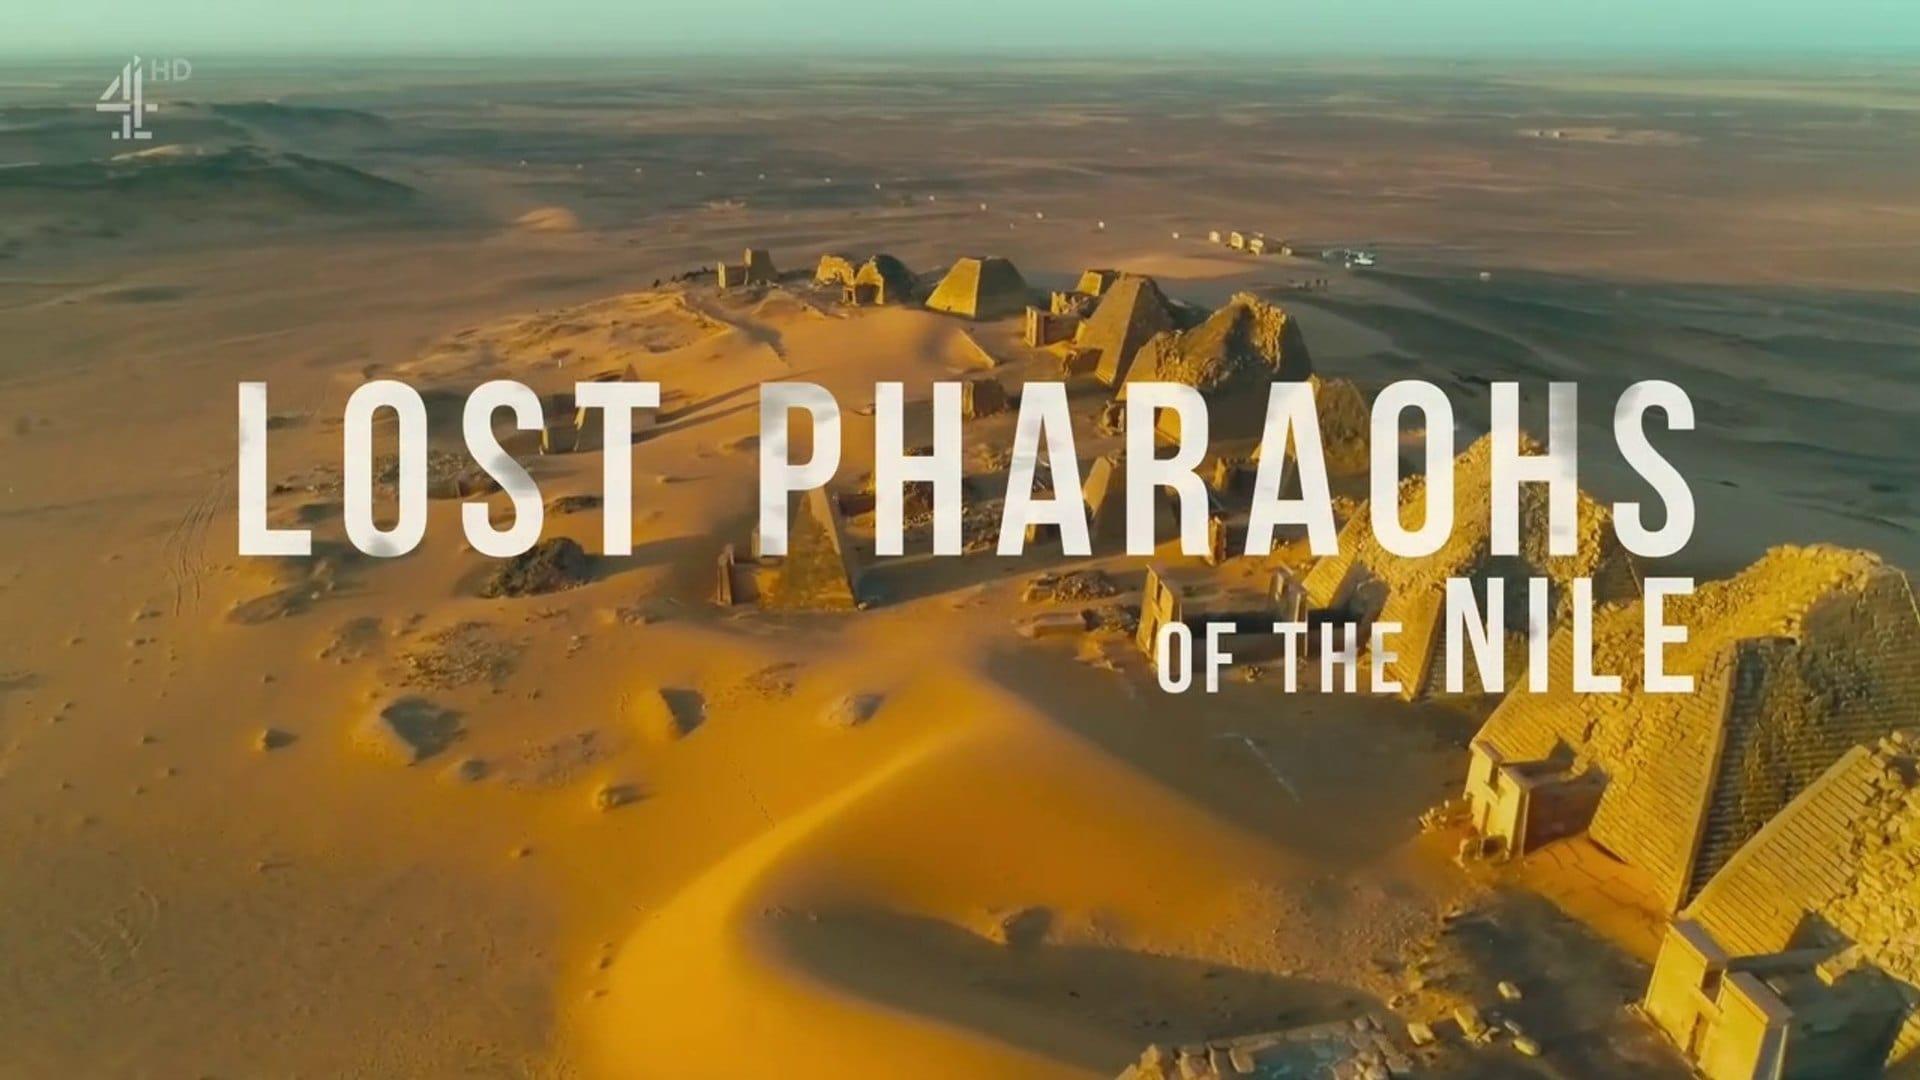 Lost Pharaohs of the Nile backdrop